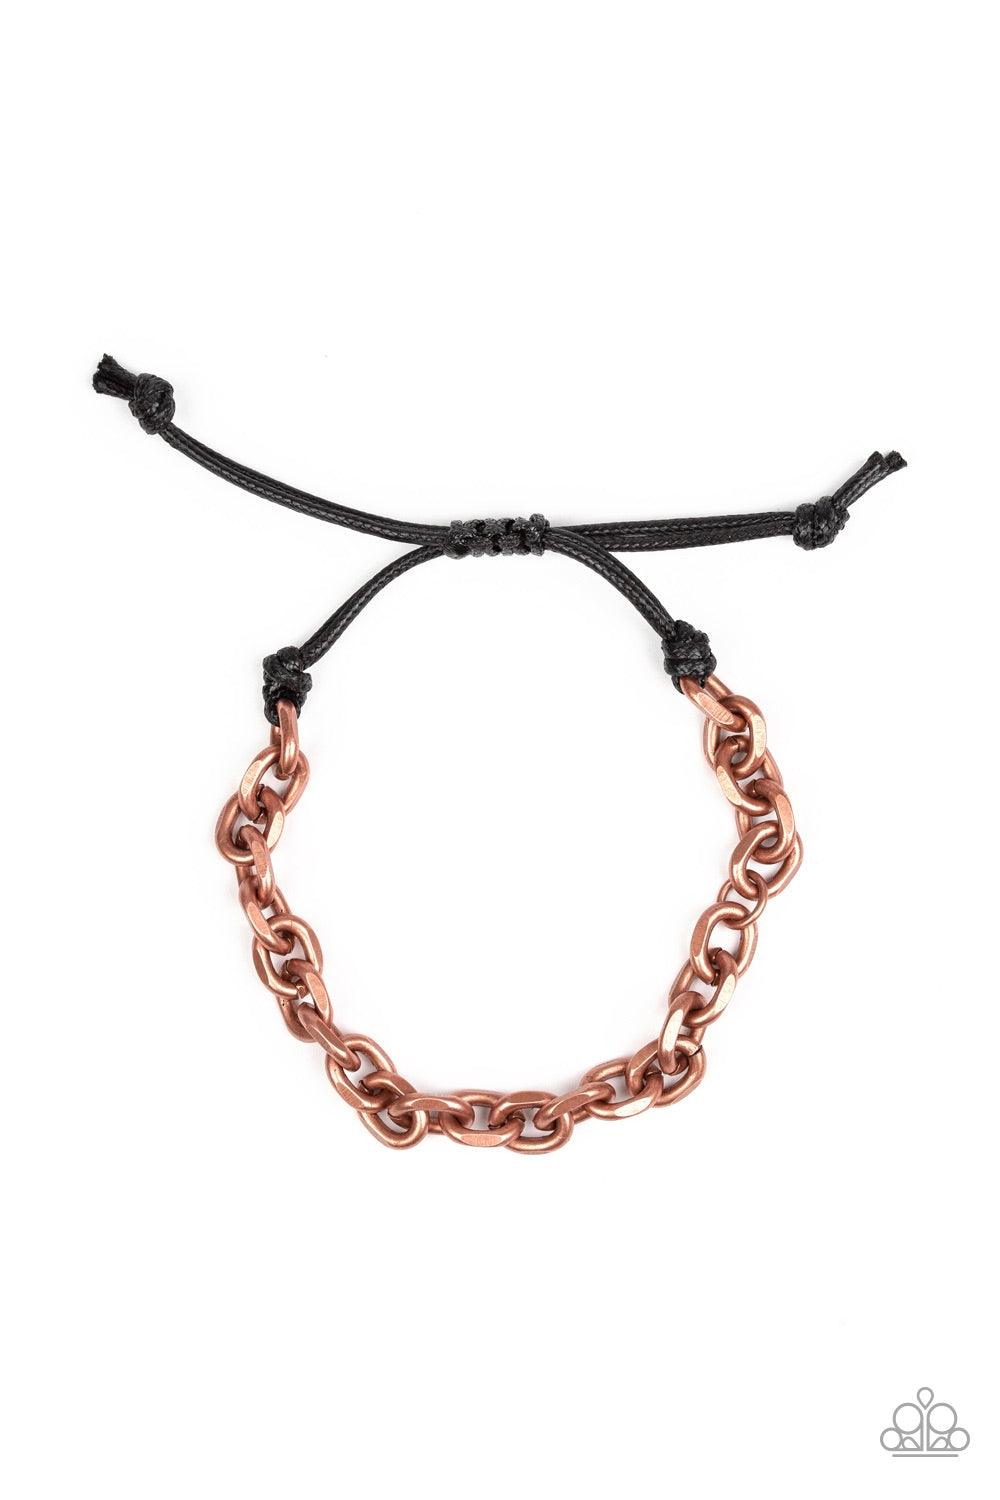 Paparazzi Accessories Rumble - Copper Shiny black cording knots around the ends of a copper beveled cable chain that is wrapped across the top of the wrist for a versatile look. Features an adjustable sliding knot closure. Jewelry